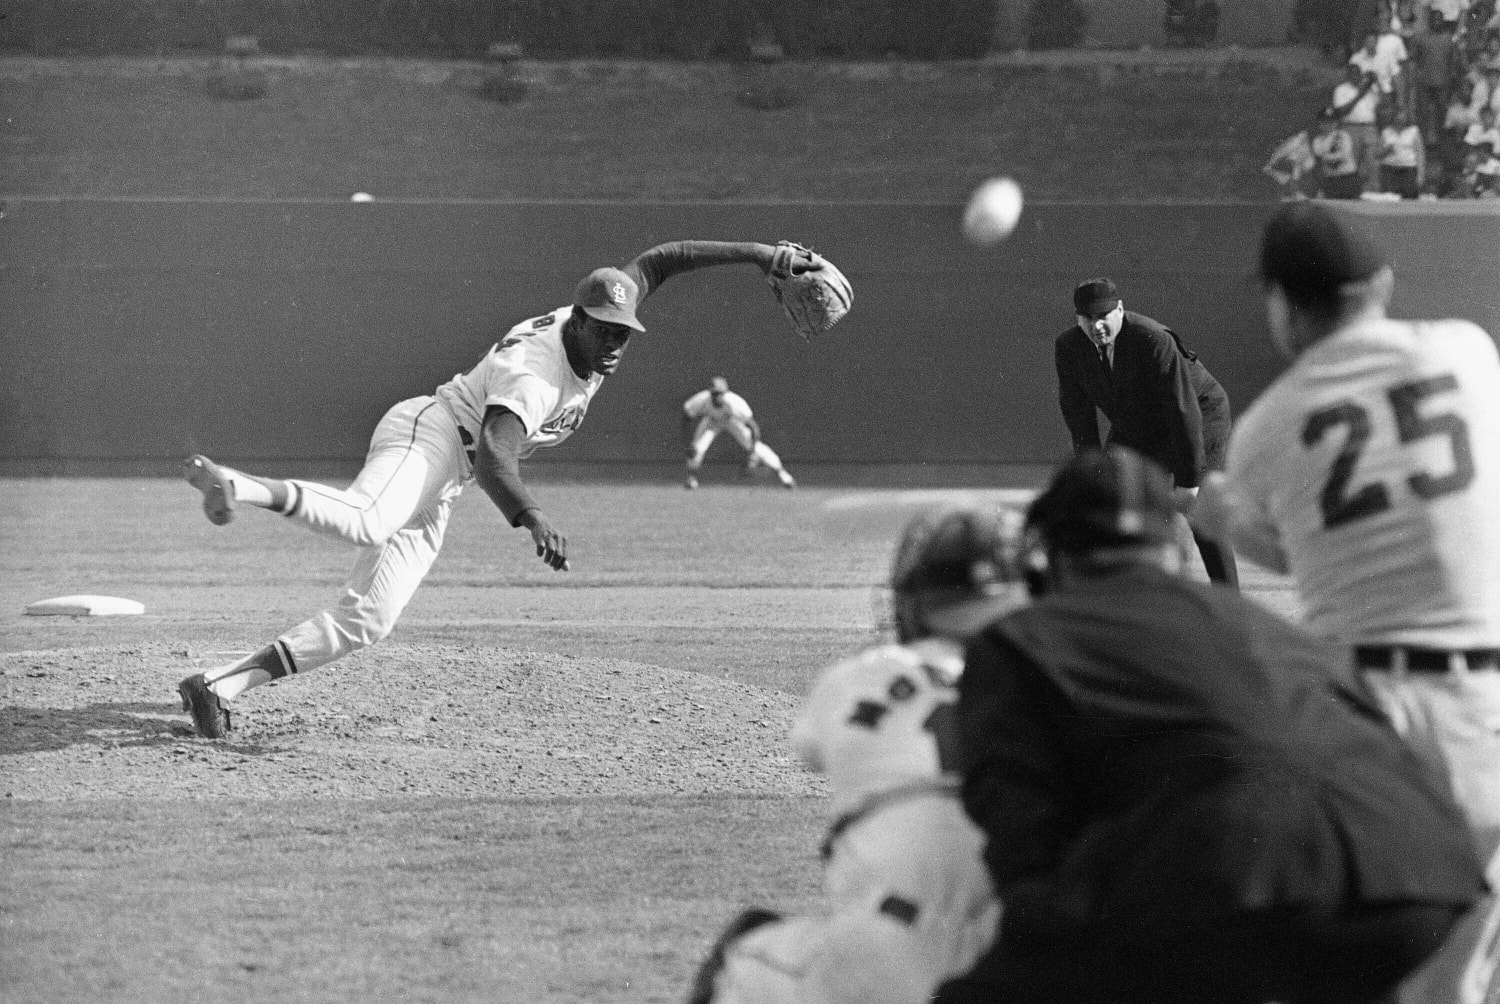 MLB on X: We mourn the passing of Tom Seaver, a Hall of Fame